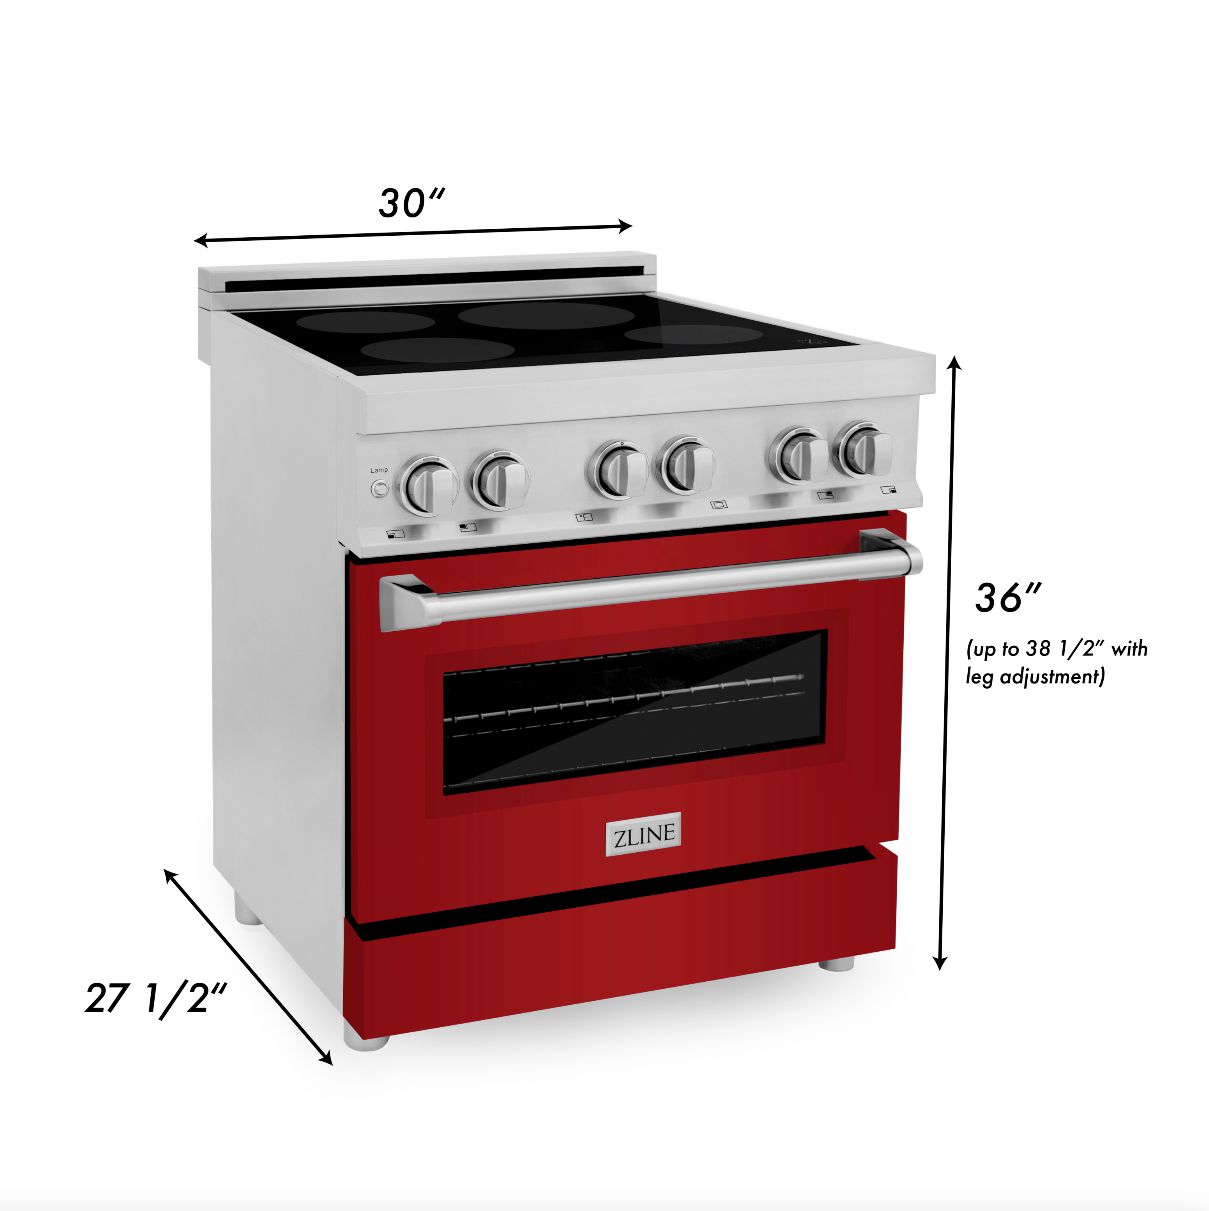 ZLINE 30 in. 4.0 cu. ft. Induction Range with a 4 Induction Element Stove and Electric Oven in Stainless Steel with Red Gloss Door (RAIND-RG-30) dimensions for installation